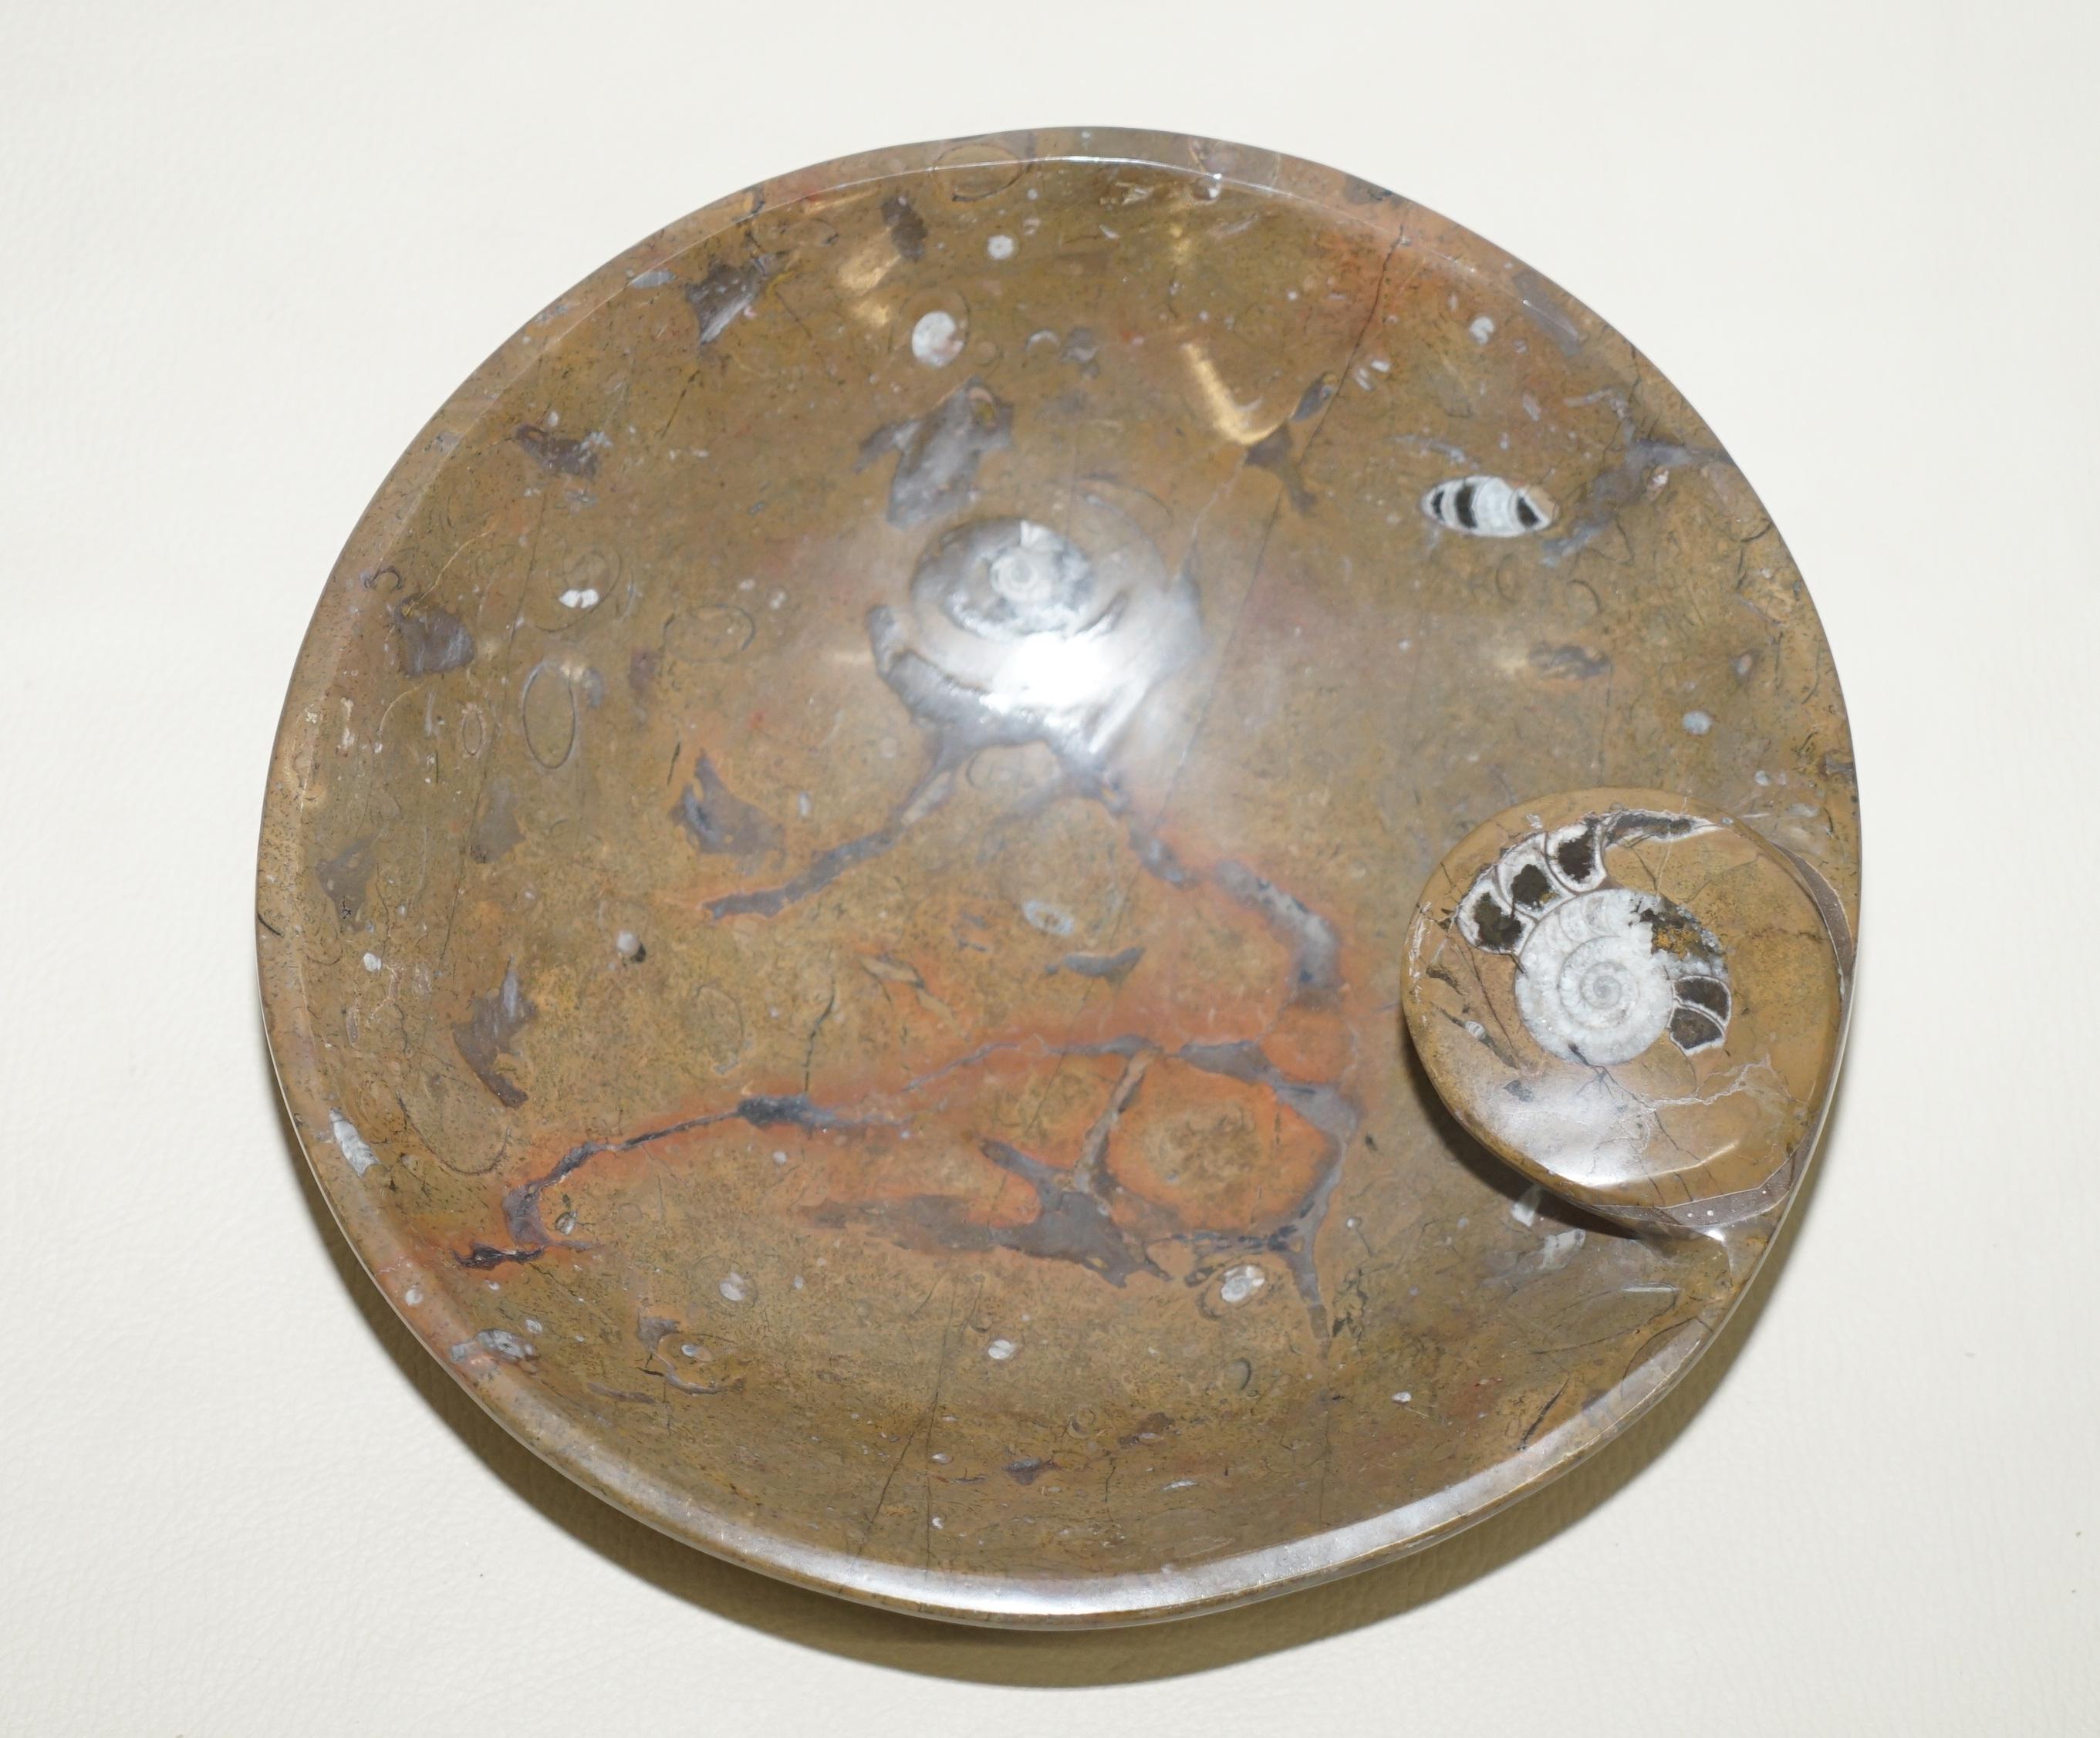 We are delighted to offer this very rare original circa 180+ Million year old Atlas Mountains Morocco Fossil bowl polished to a marble finish

They are truly exquisite, they each have one large fossil to the top and various fossils throughout the